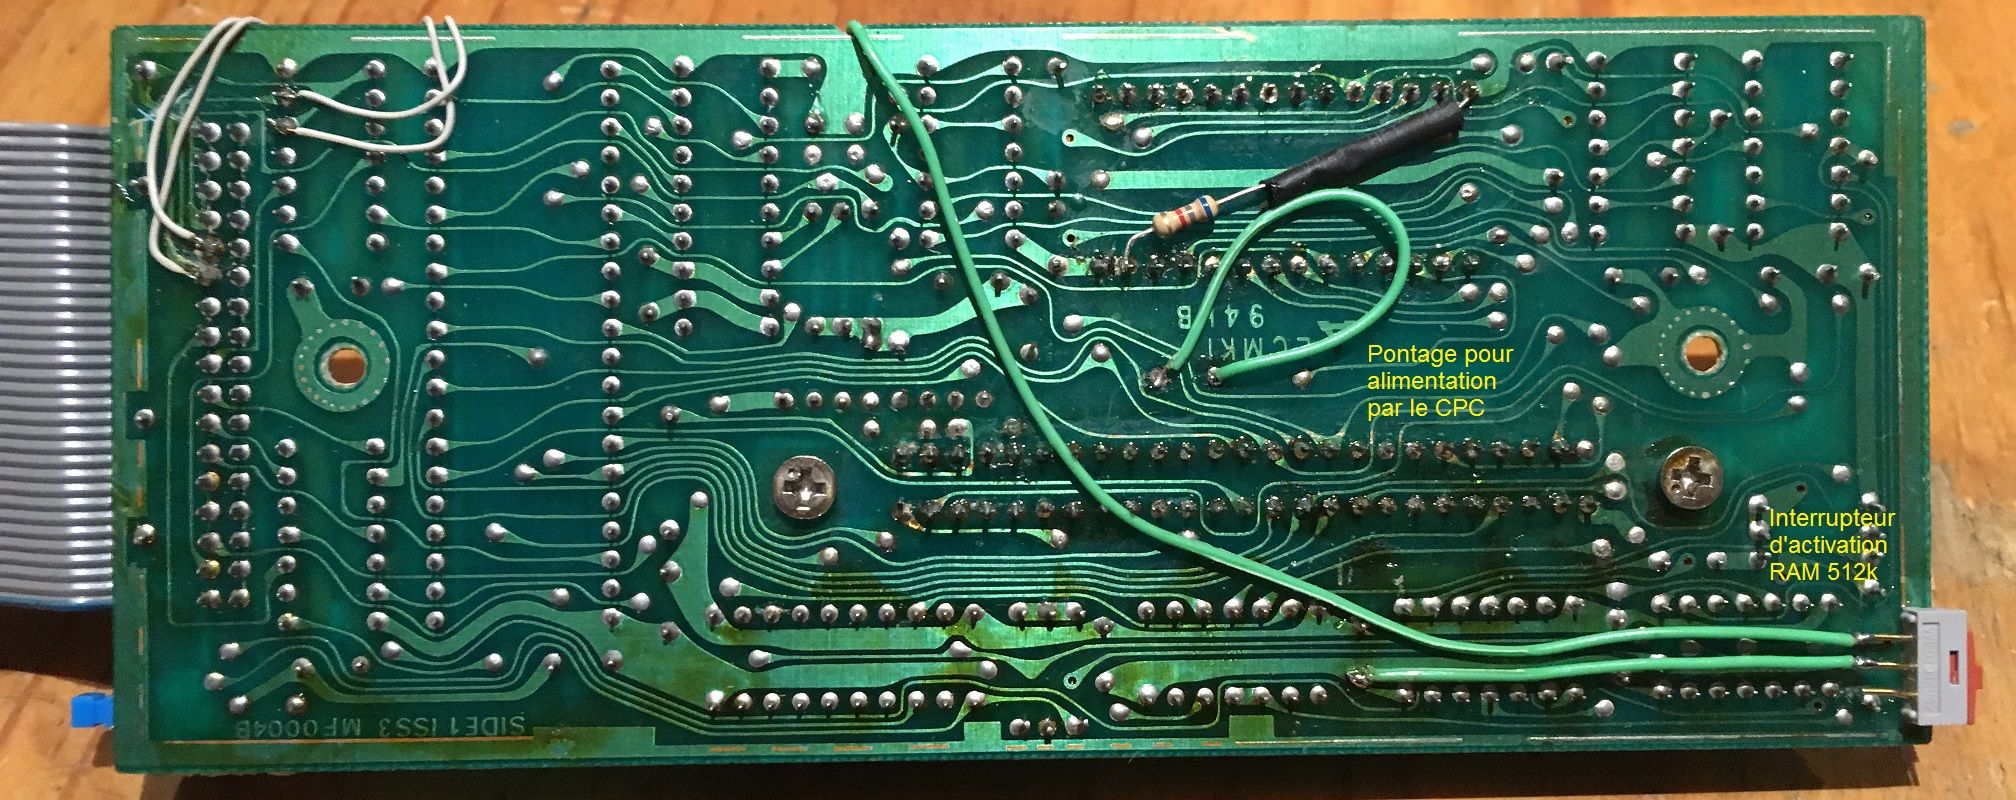 back of the modded Amstrad CPC DDI-1